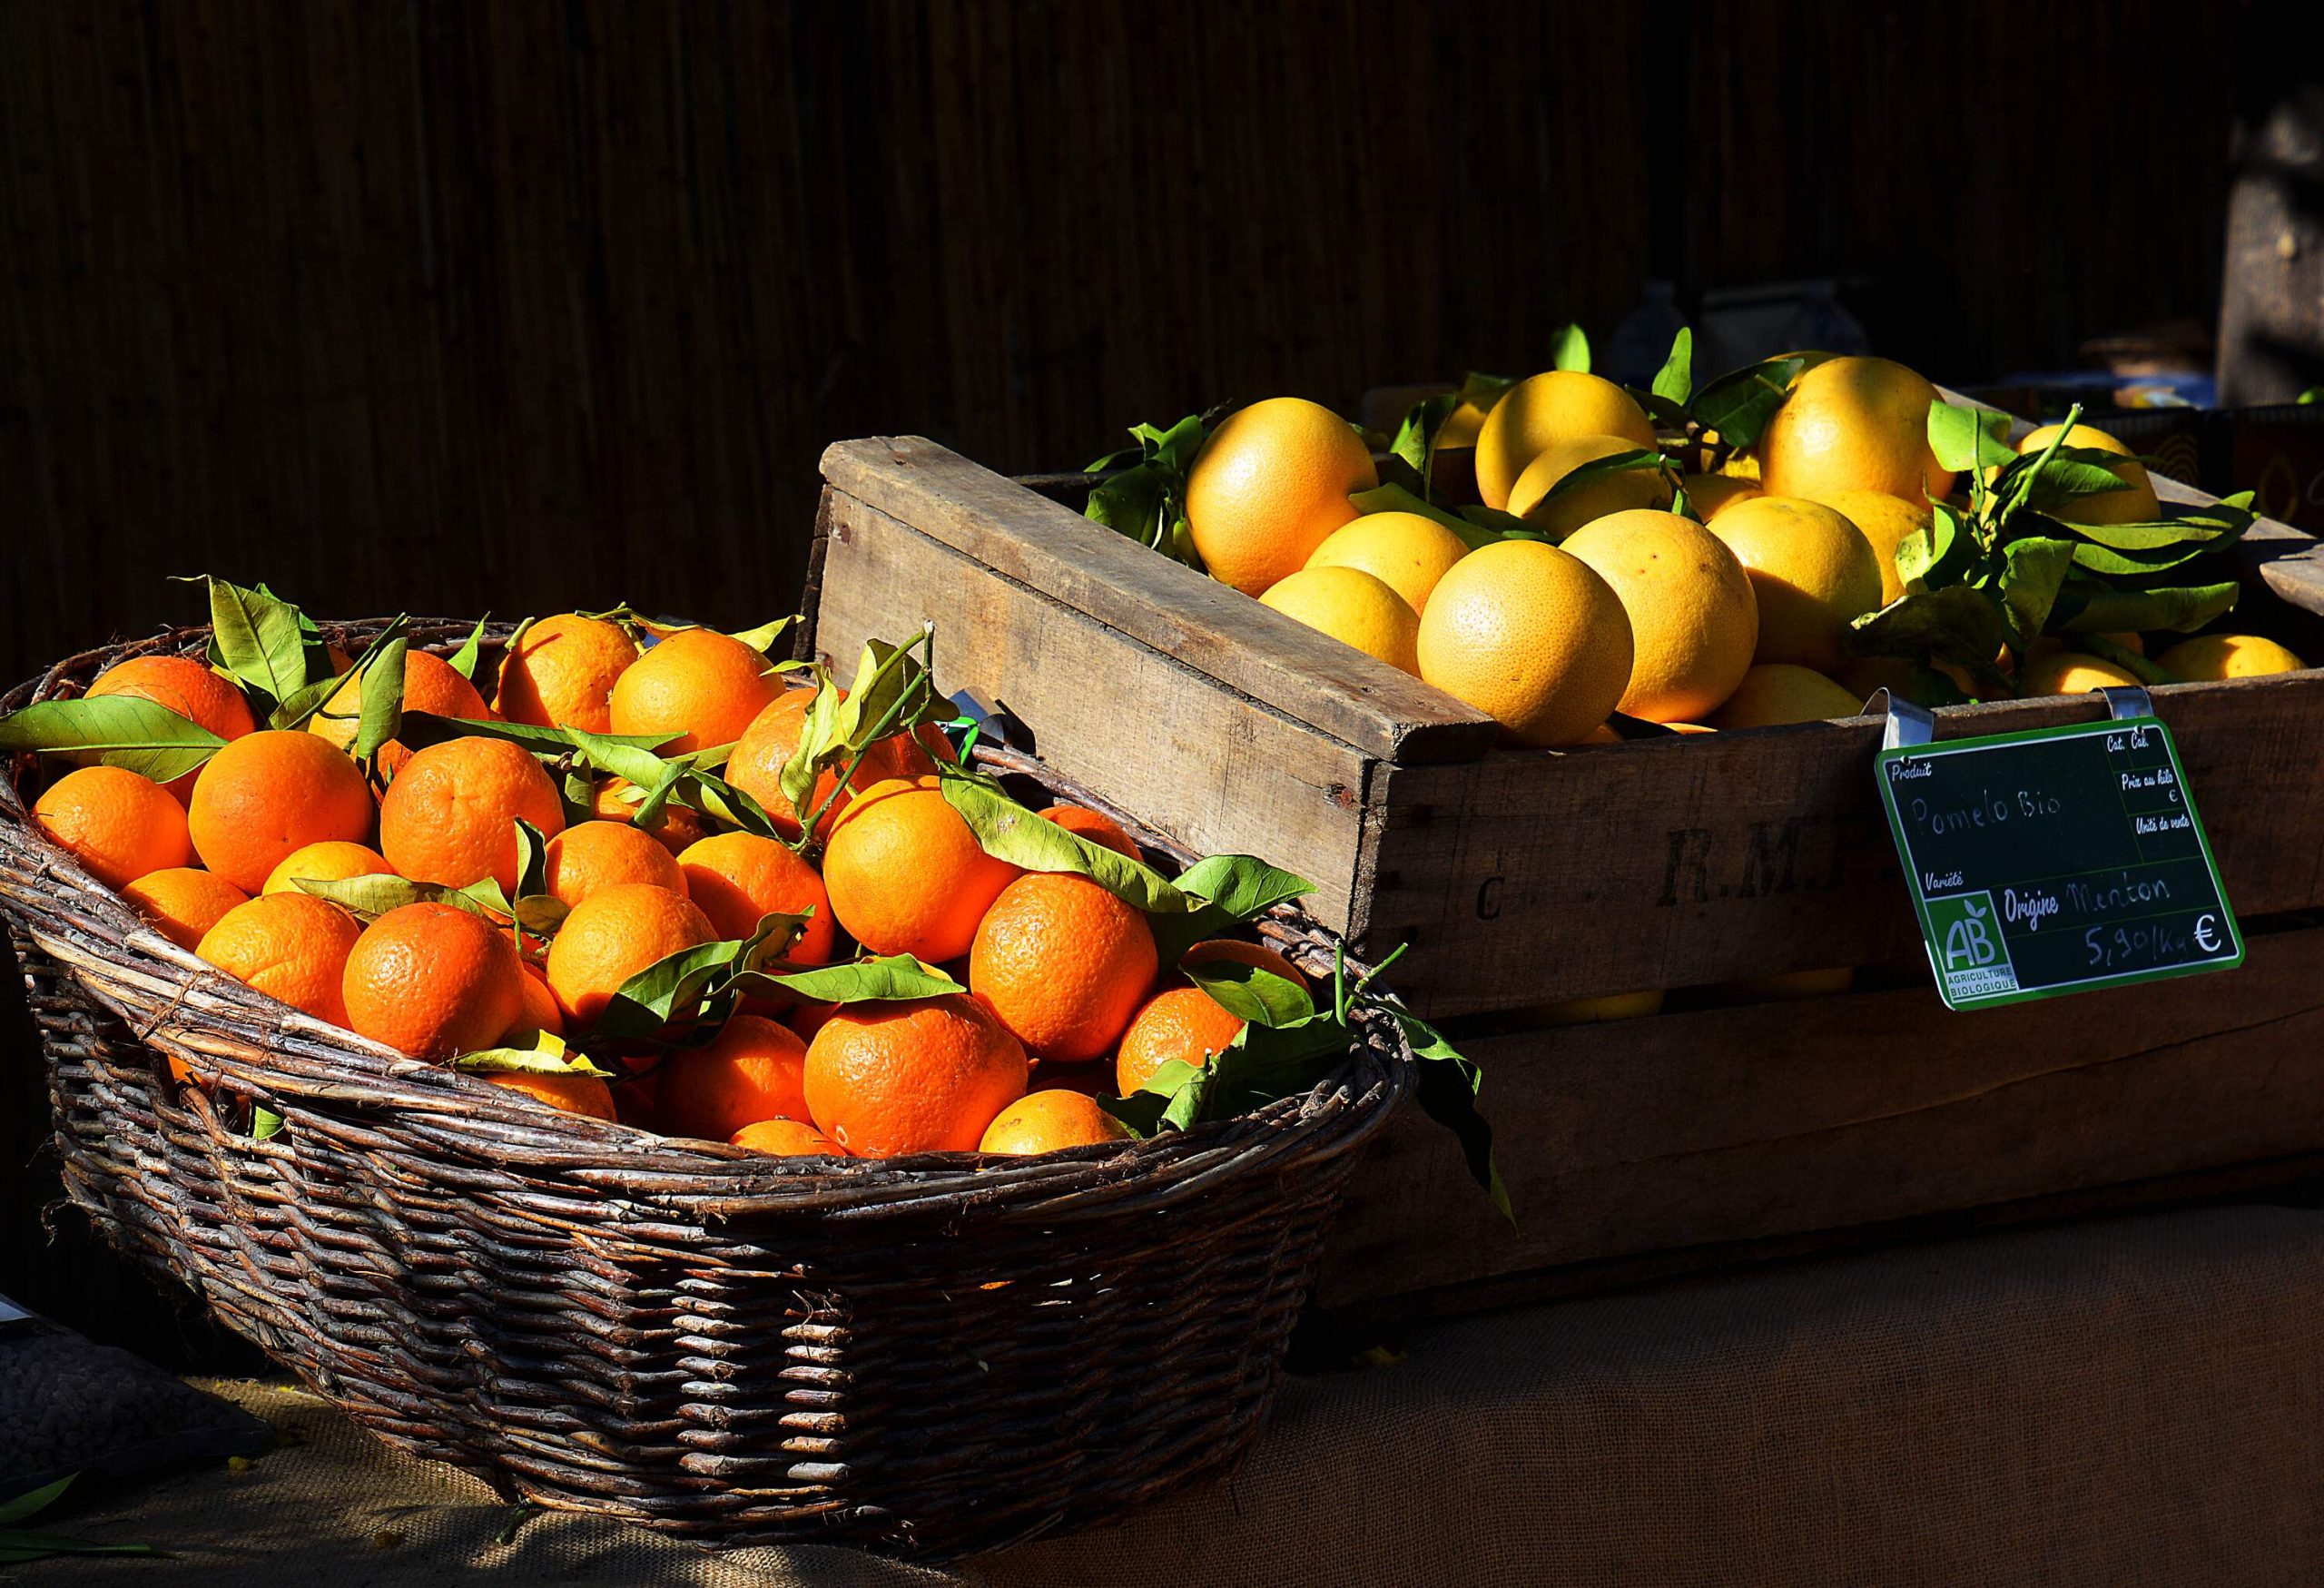 A basket full of oranges and a wooden crate filled with lemons on display.